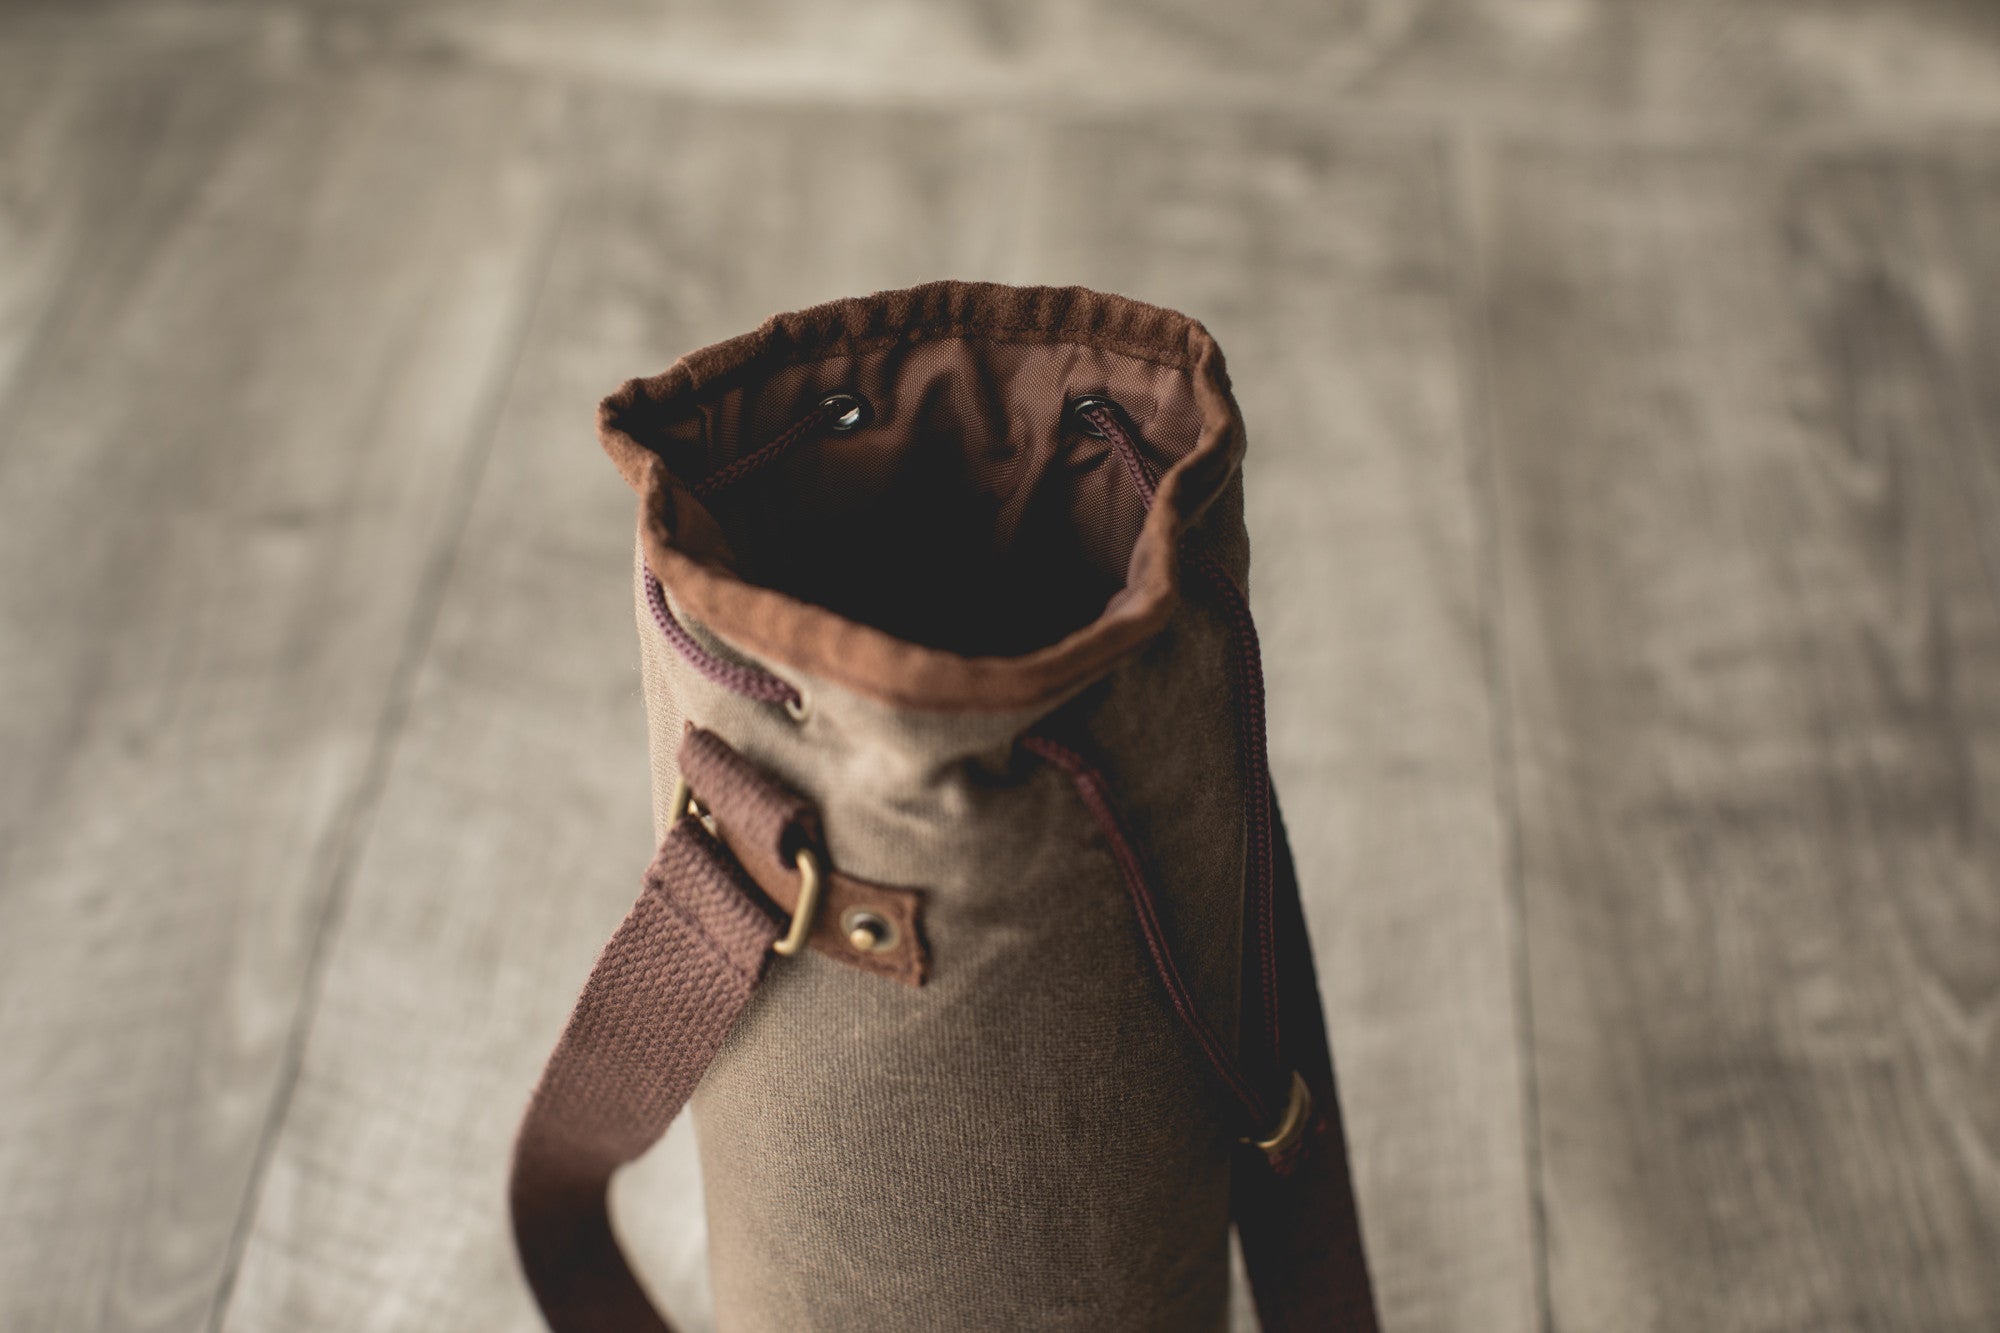 Green Bay Packers - Waxed Canvas Wine Tote